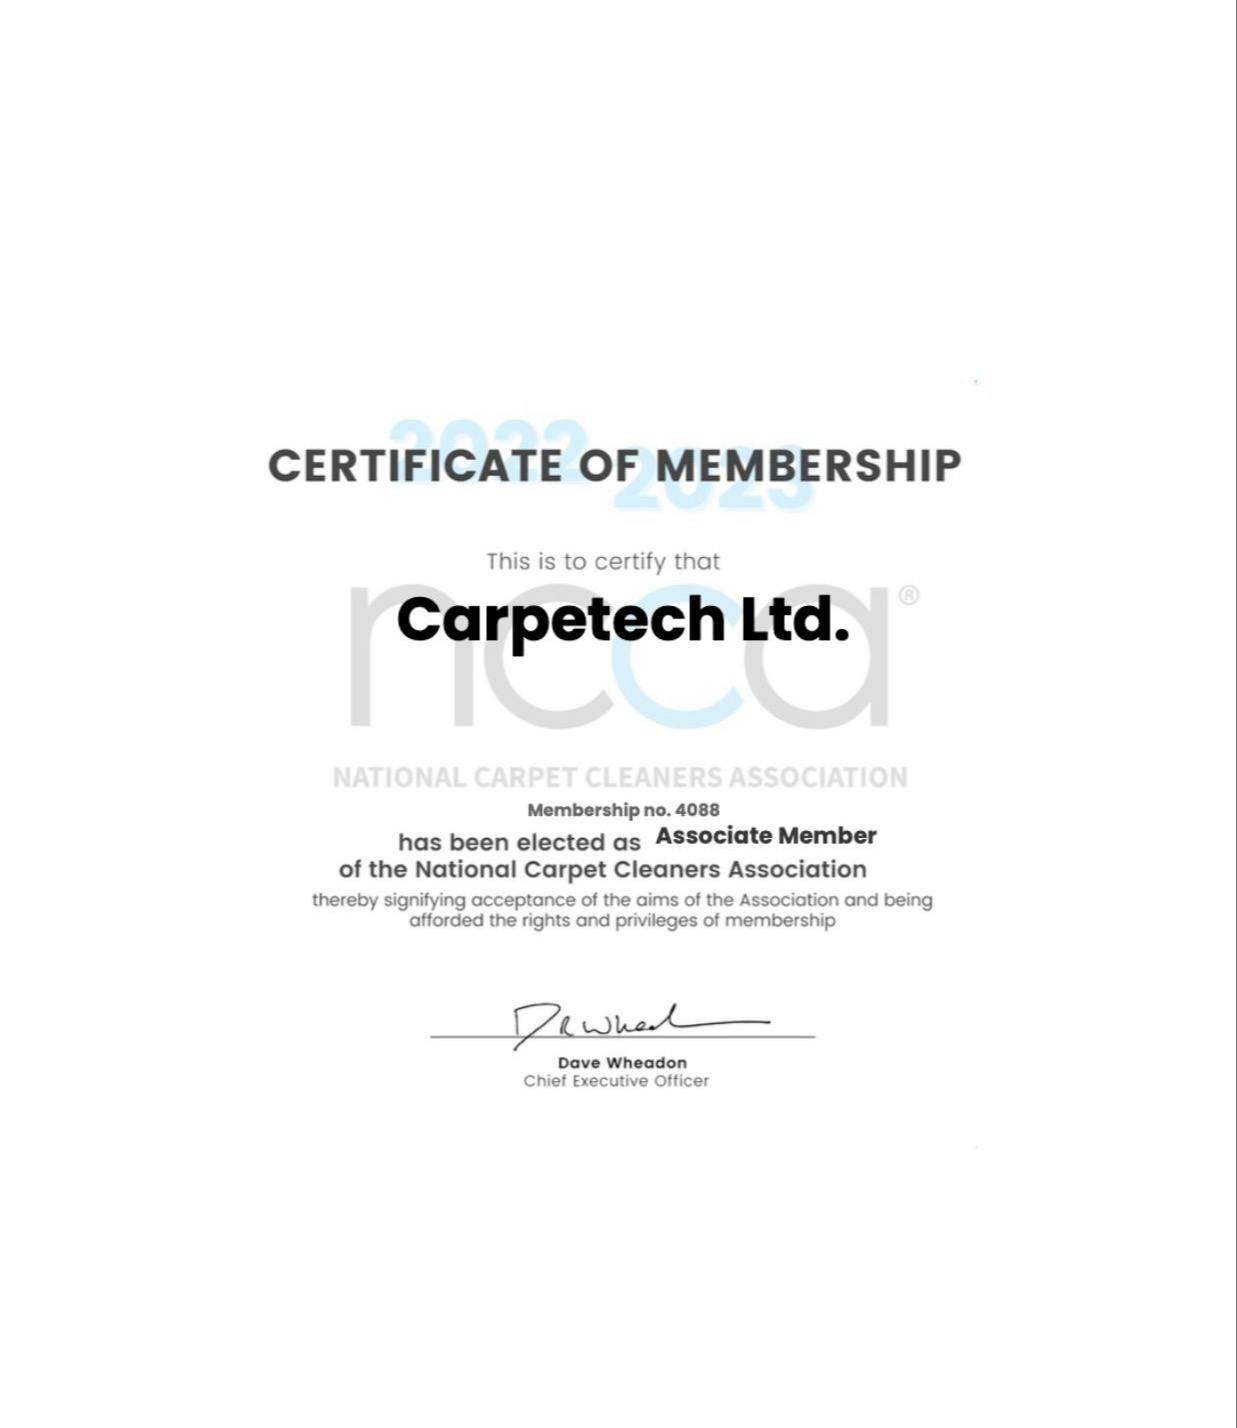 Carpetech Excellence: Delighted Customer with Sparkling Clean Results